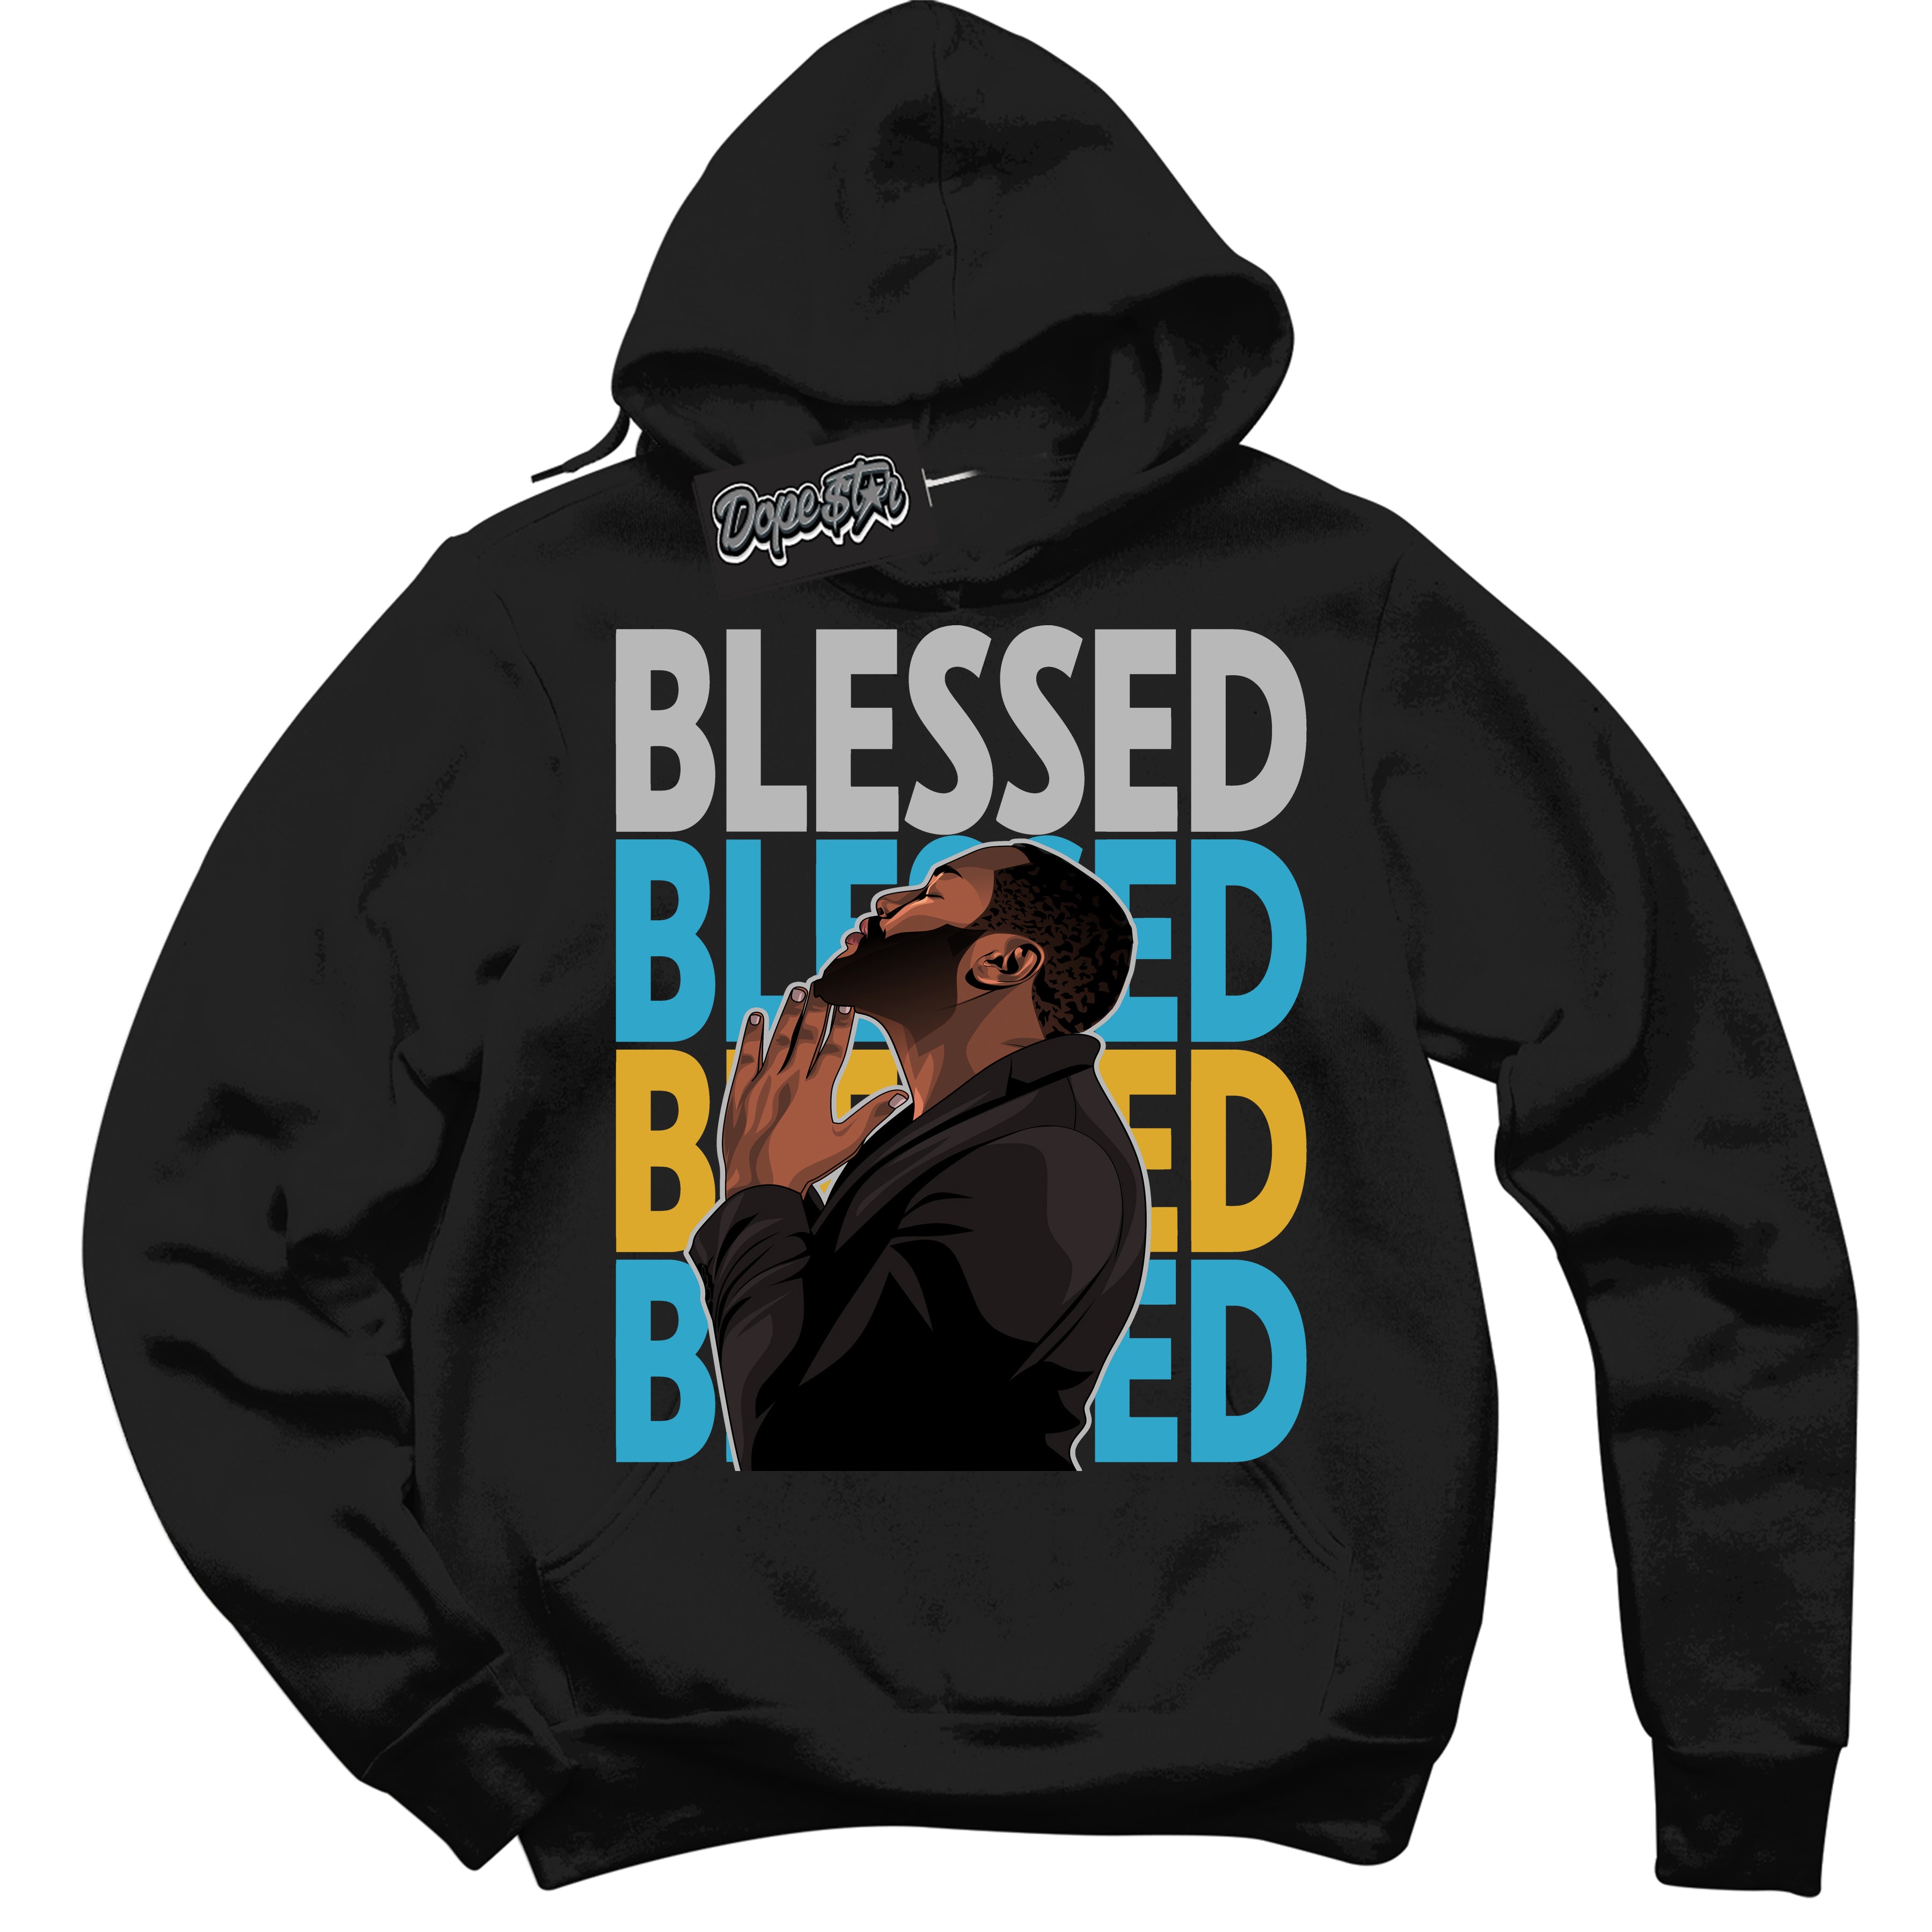 Cool Black Graphic Hoodie with “ God Blessed “ print, that perfectly matches Air Jordan 5 AQUA  sneakers